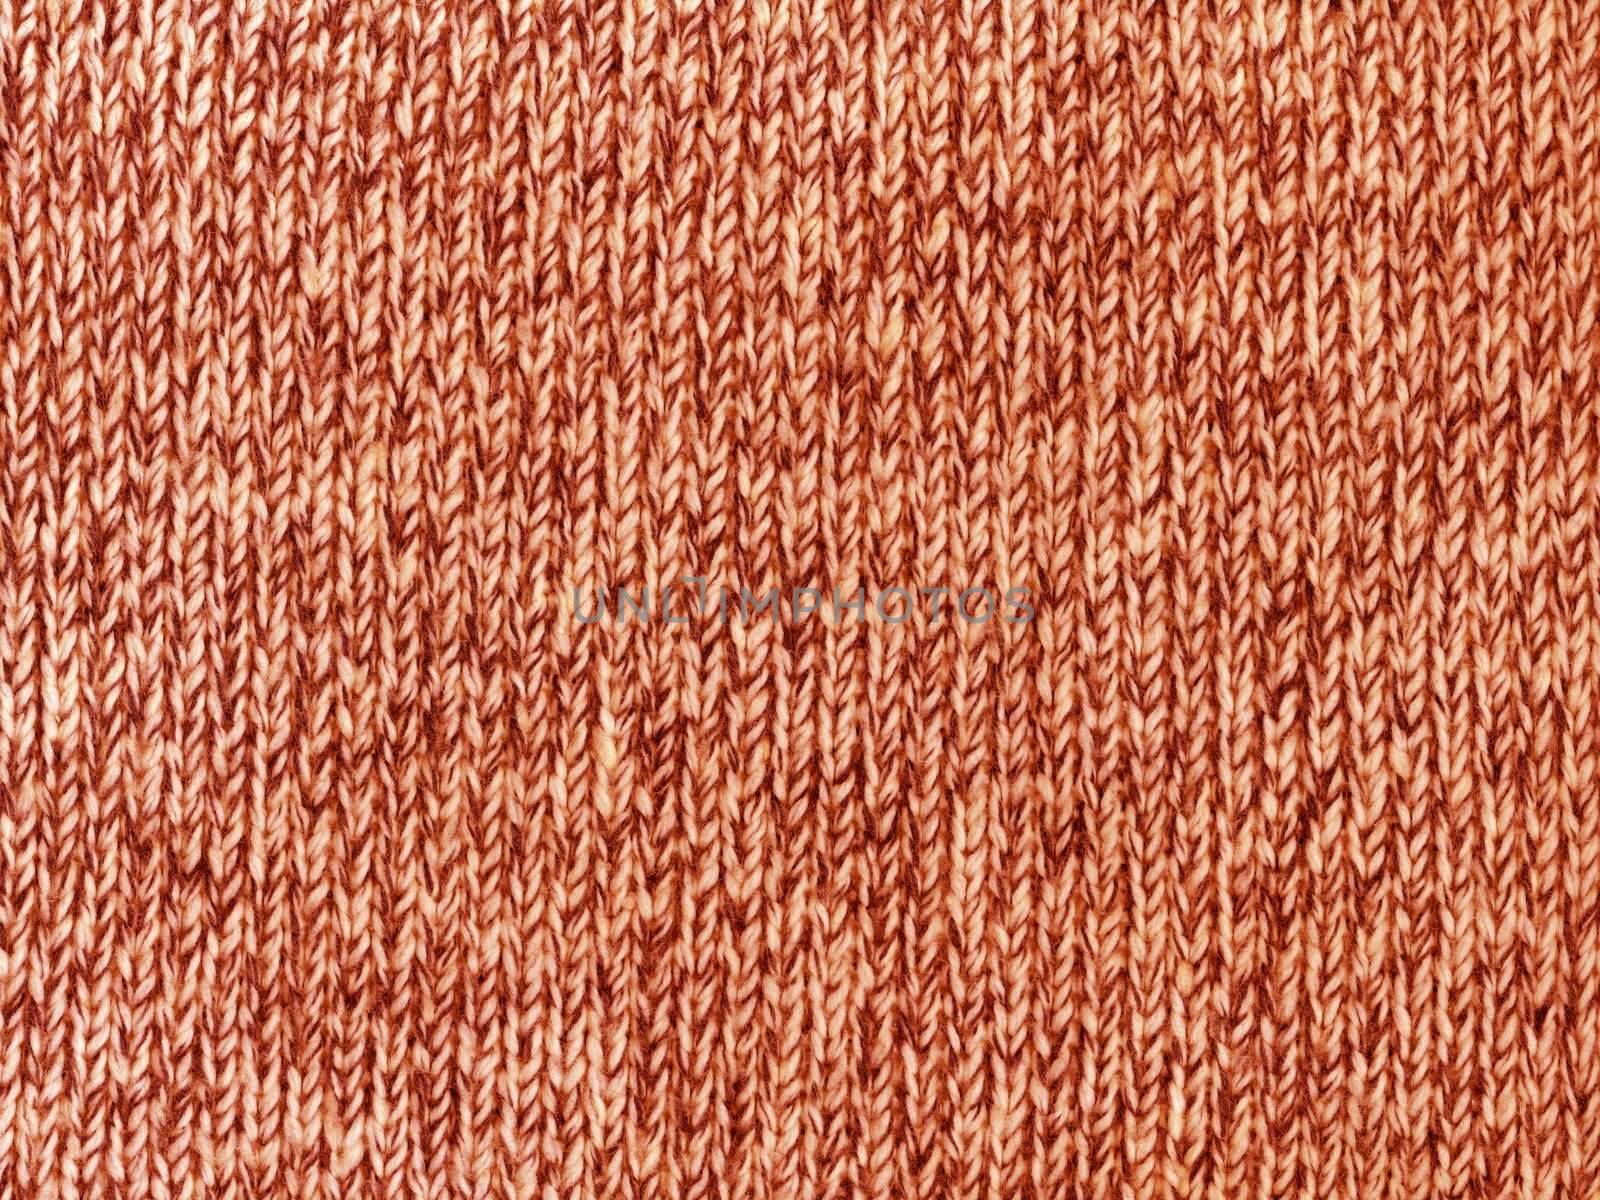 Sample of Rough Knitware by Nonboe